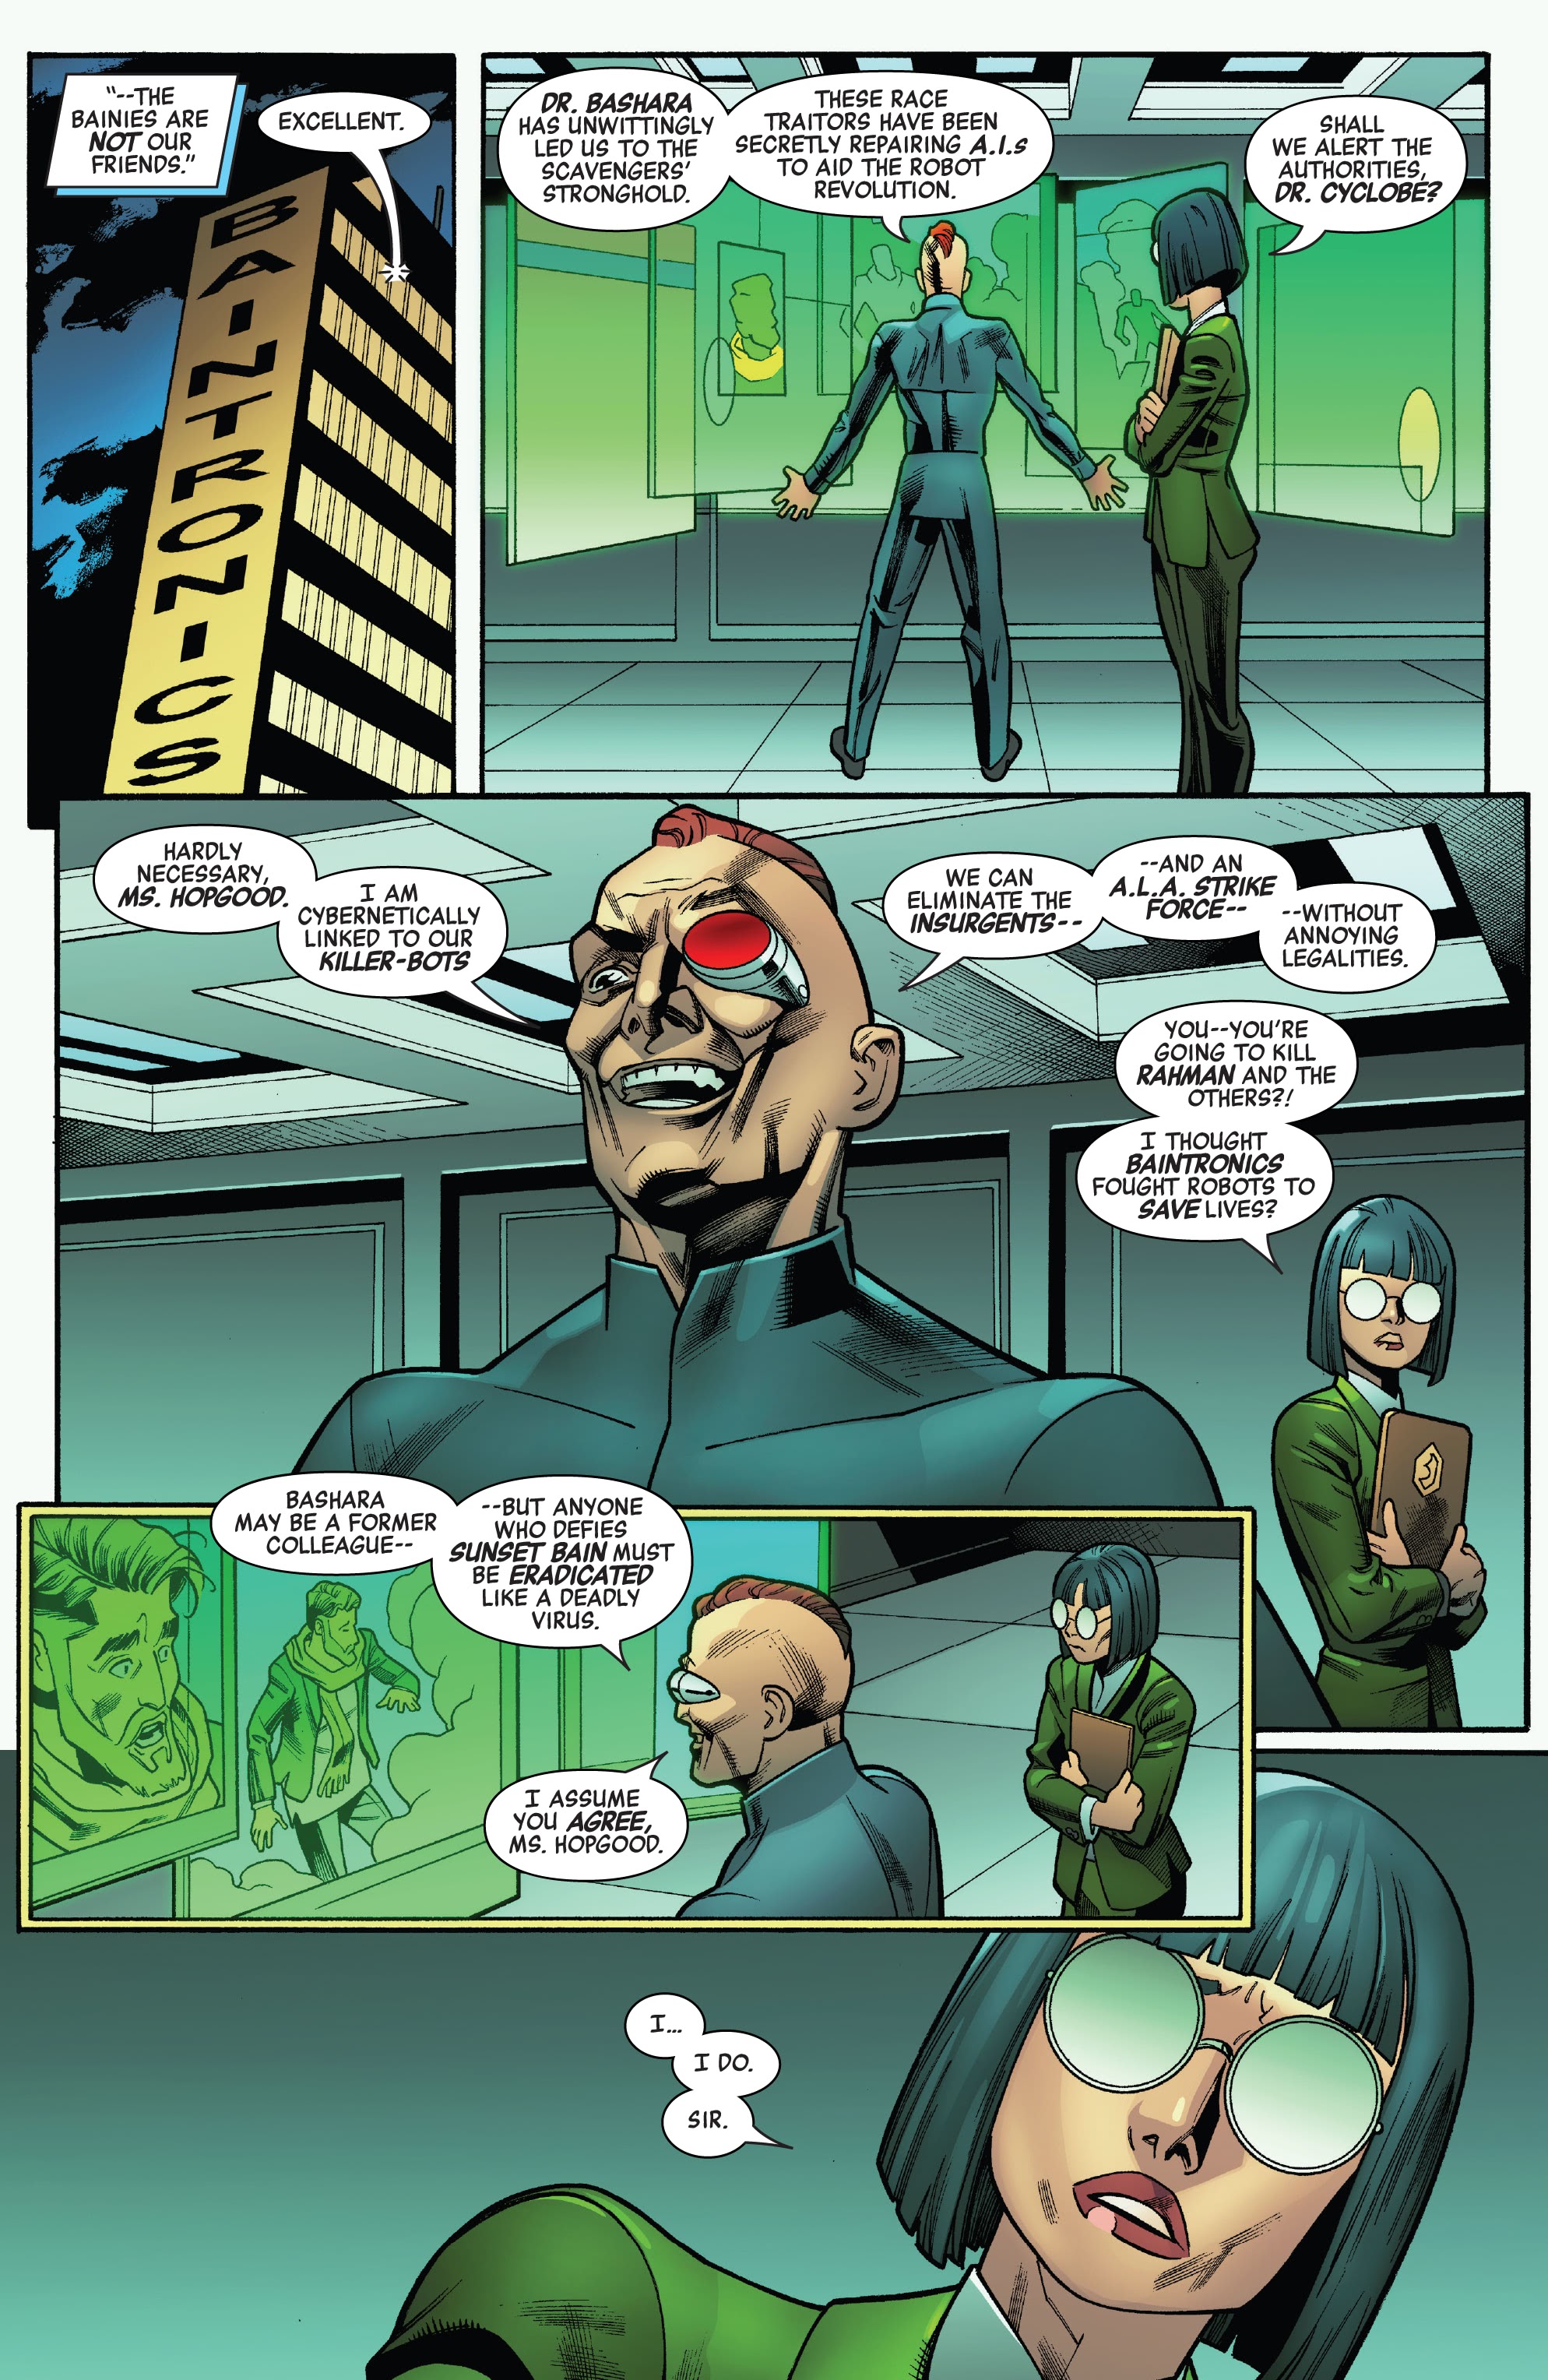 Read online Iron Man 2020: Robot Revolution - Force Works comic -  Issue # TPB (Part 1) - 58